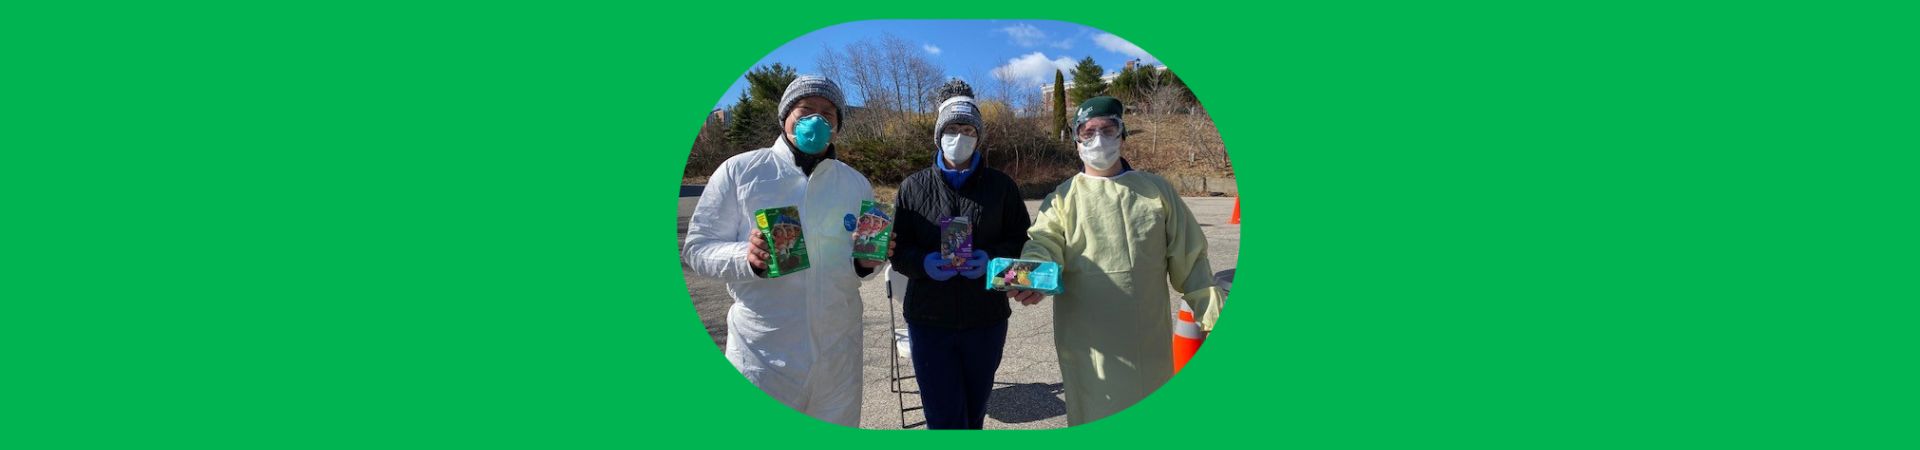  Martin's Point Rapid Testing Site workers holding donated Girl Scout Cookies 